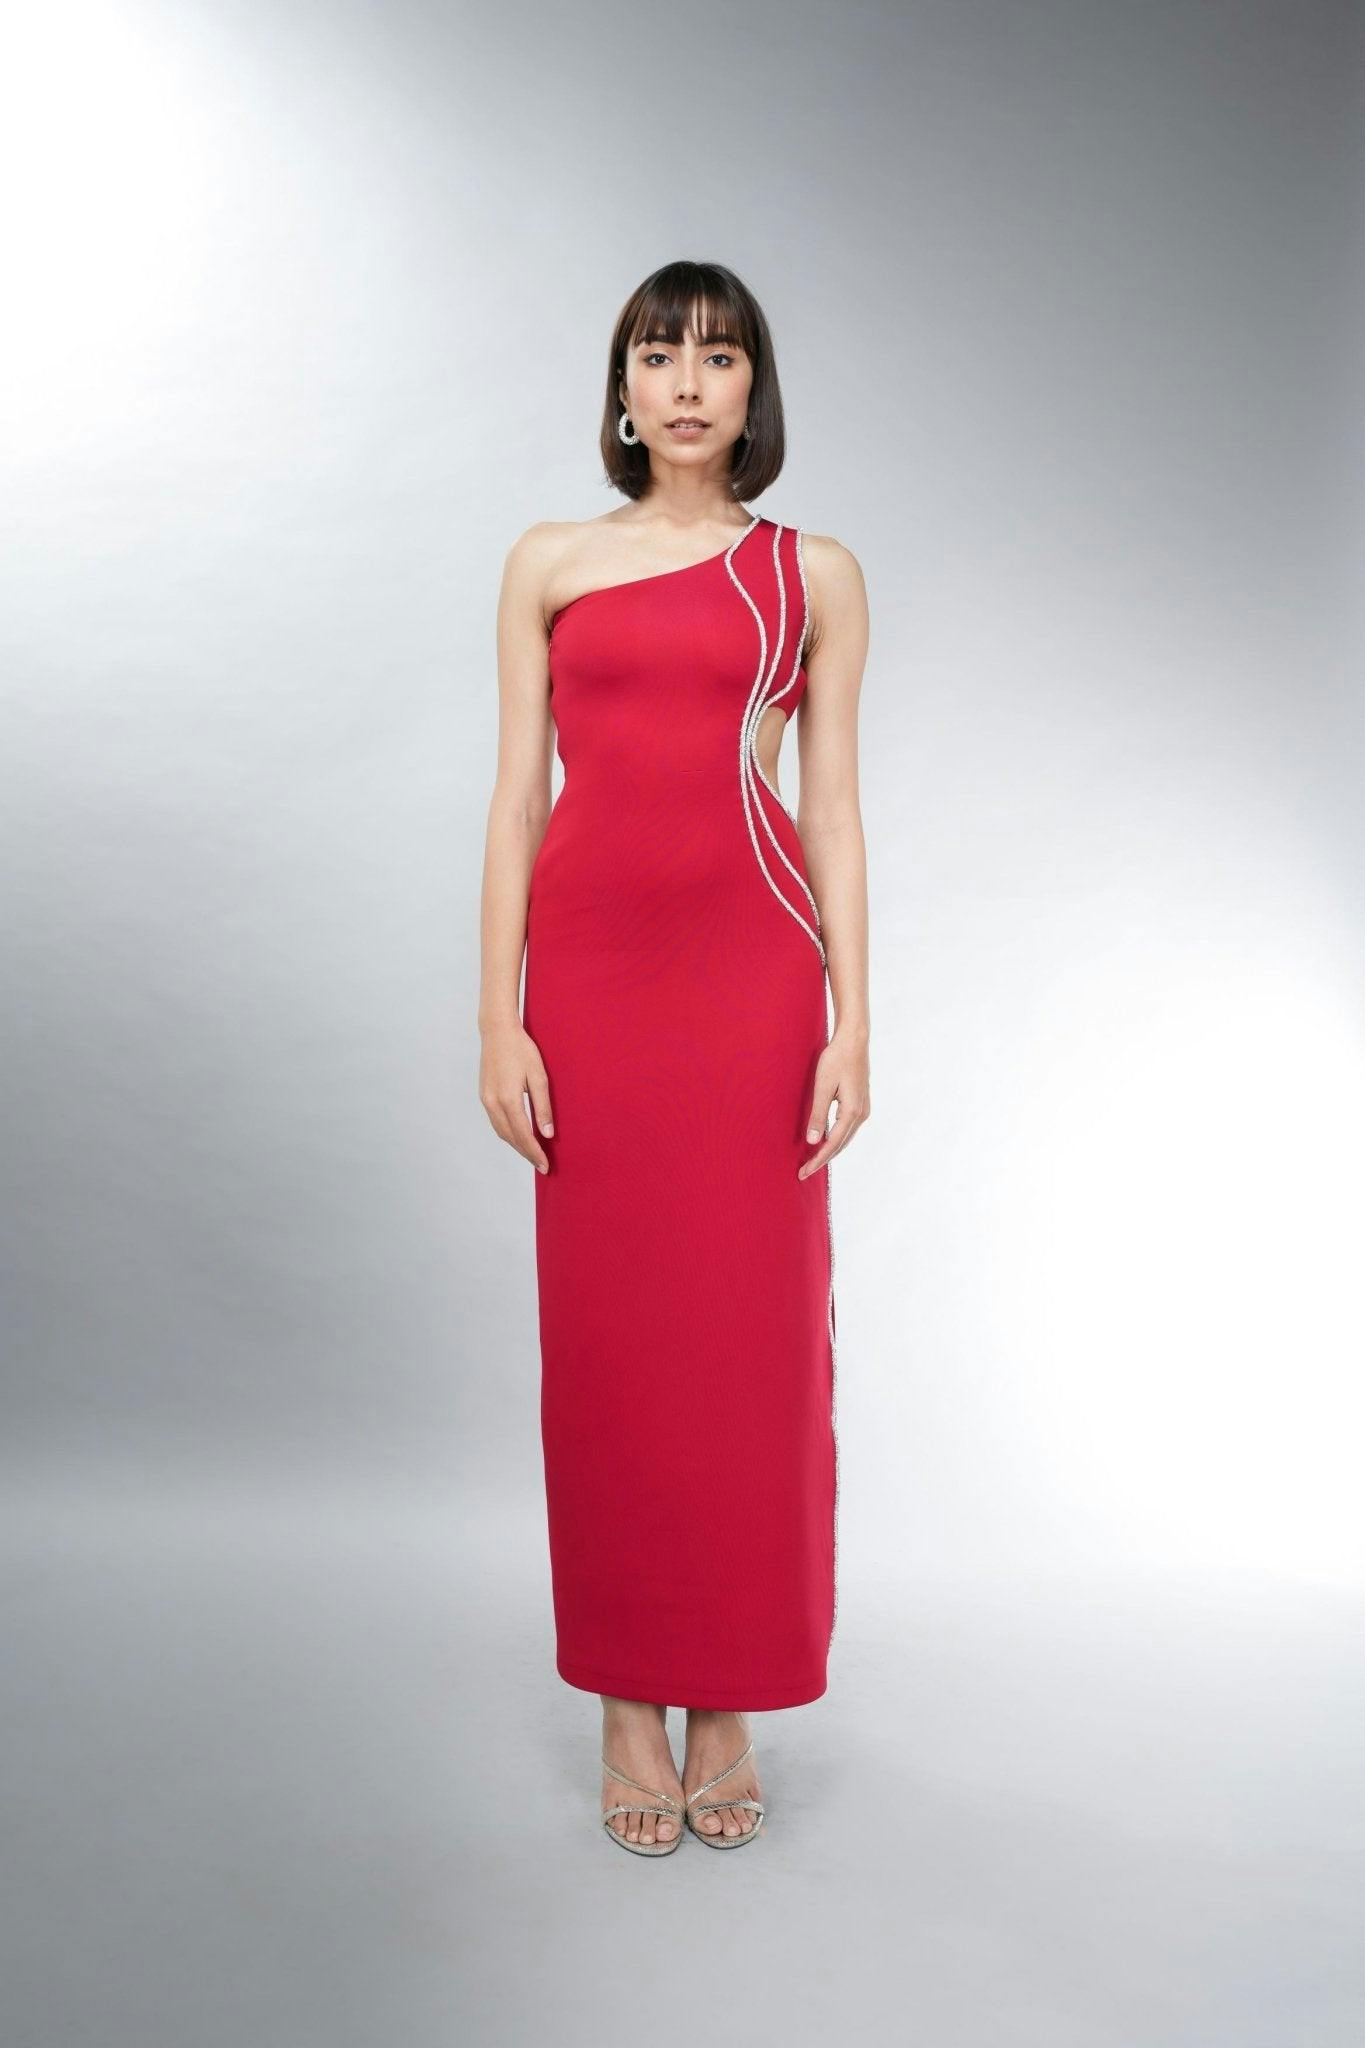 ISADORA RED, a product by NidhiandMahak